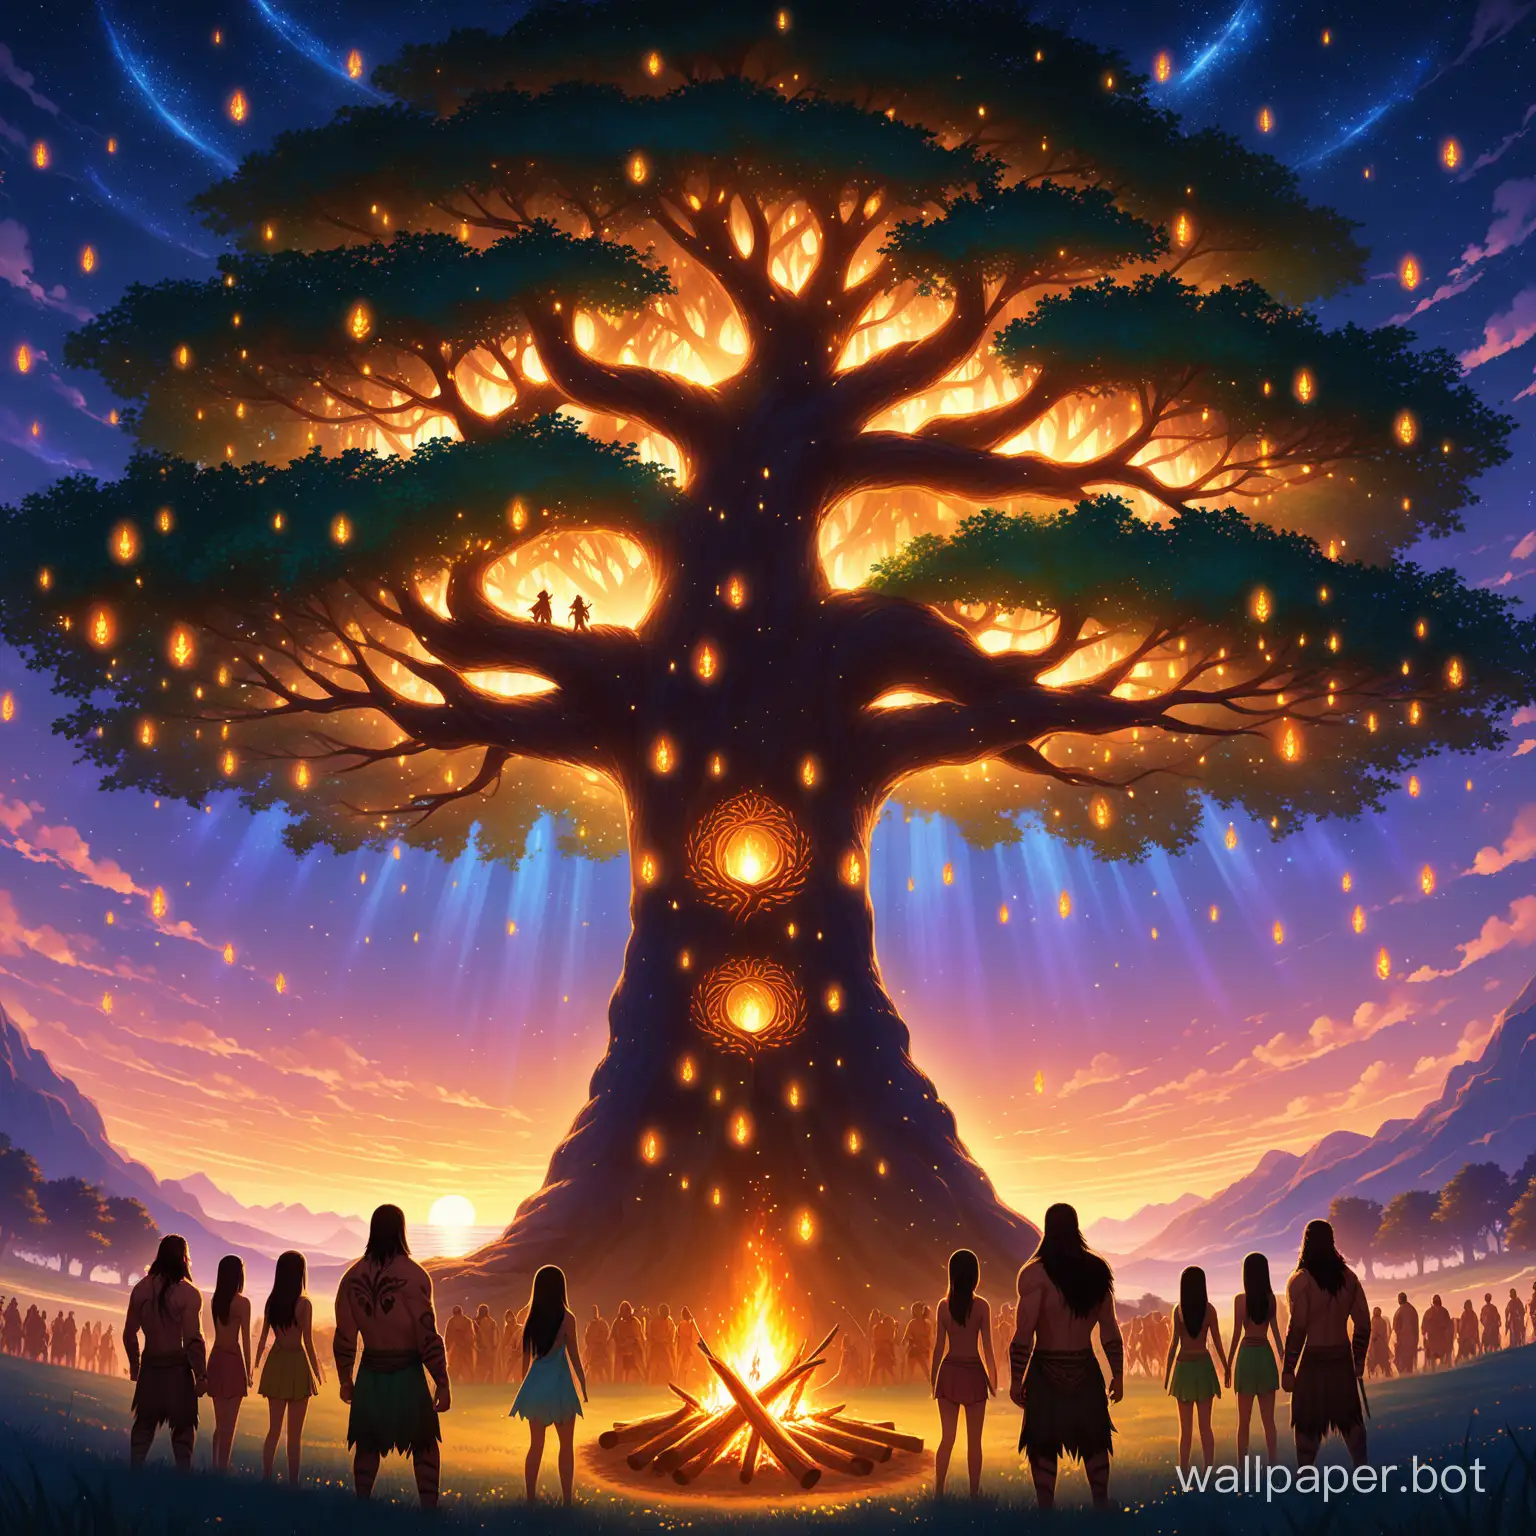 Tree-of-Life-Surrounded-by-Fairies-Humans-and-Berserkers-at-Sunset